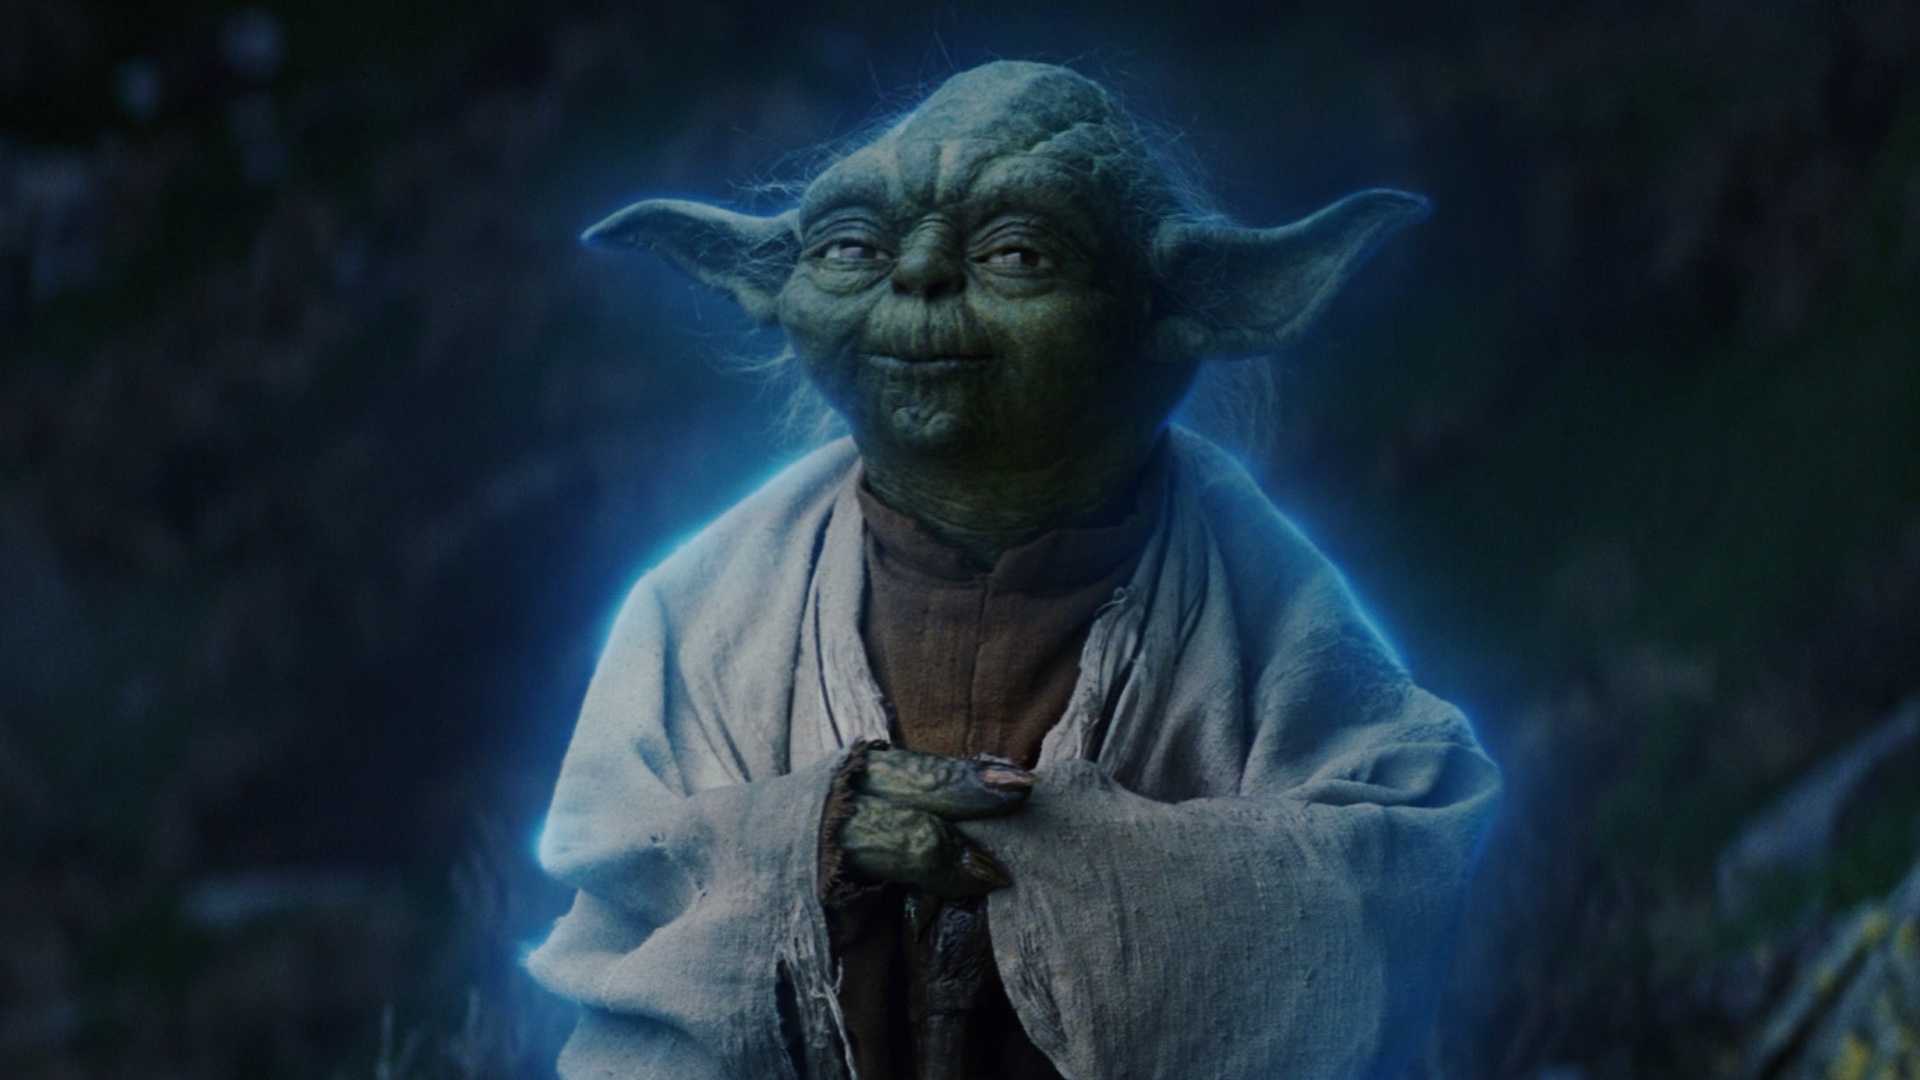 Star Wars: The Last Jedi’s Frank Oz Defends Yoda’s Actions In The Film